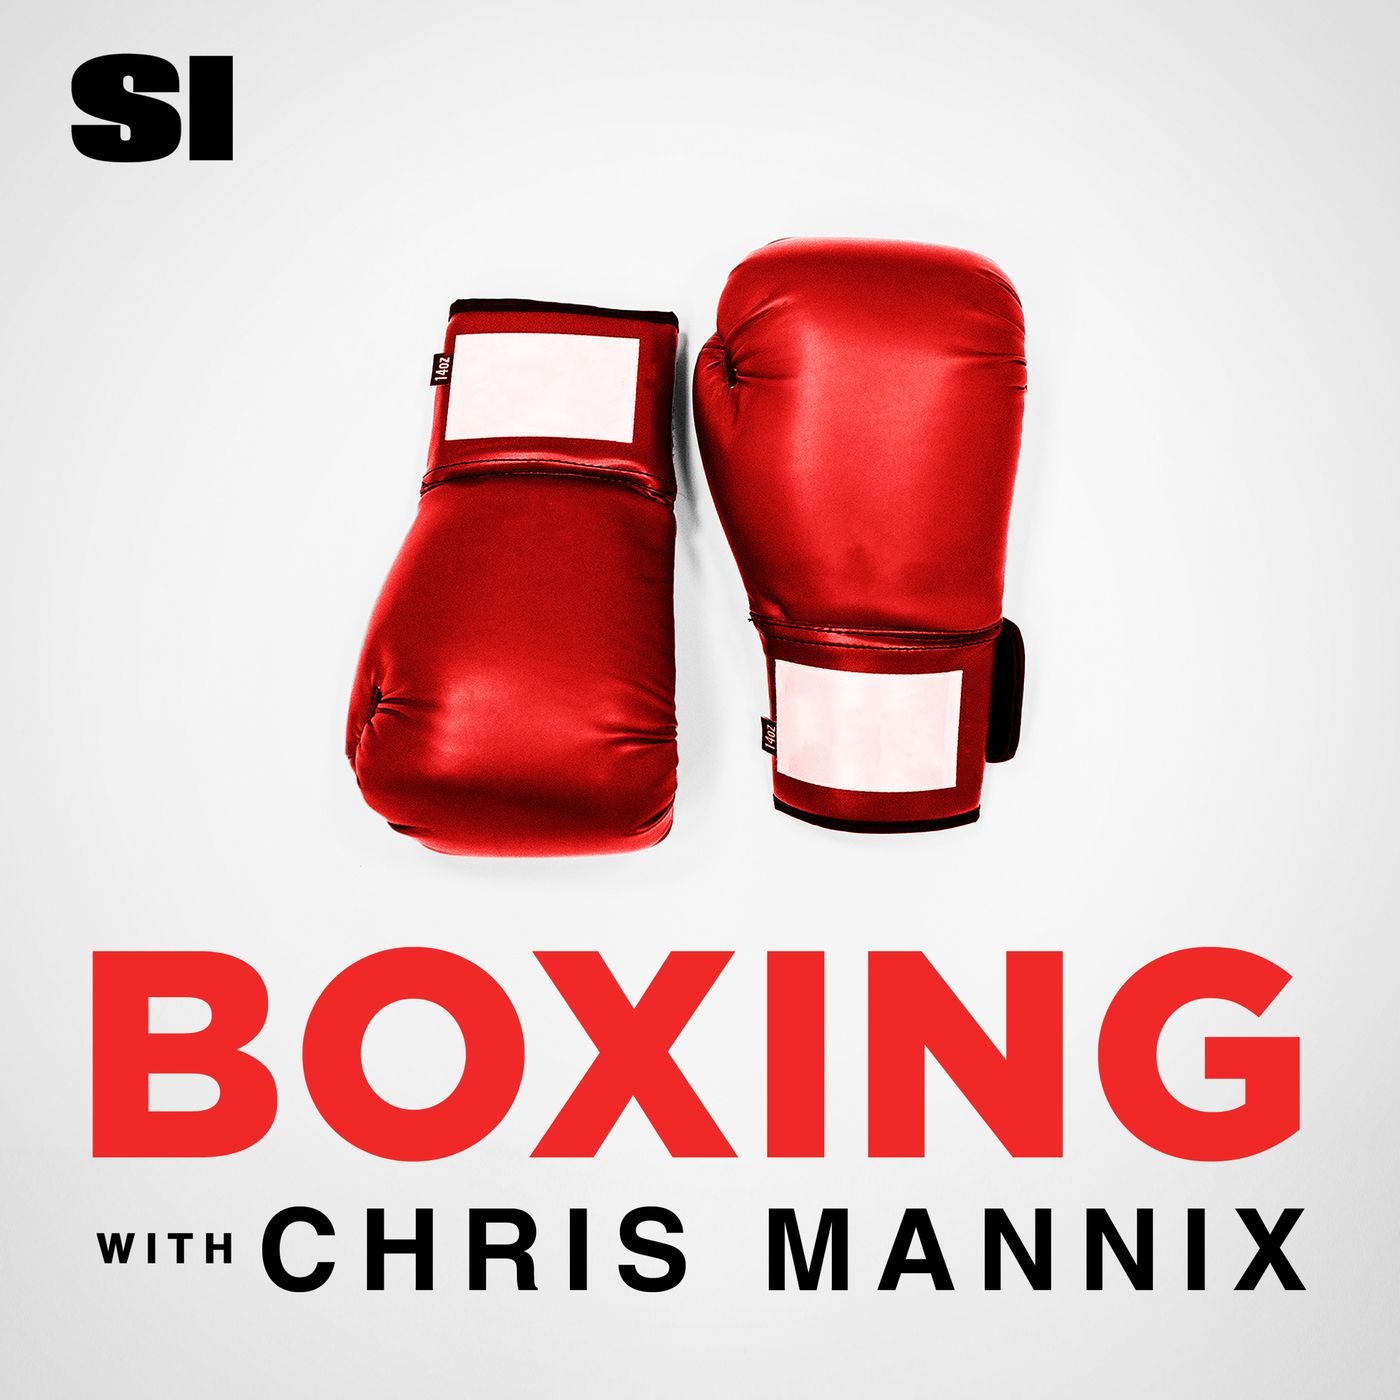 A highlight from Boxing with Chris Mannix - Francis Ngannou leaving UFC & potential Tyson Fury fight